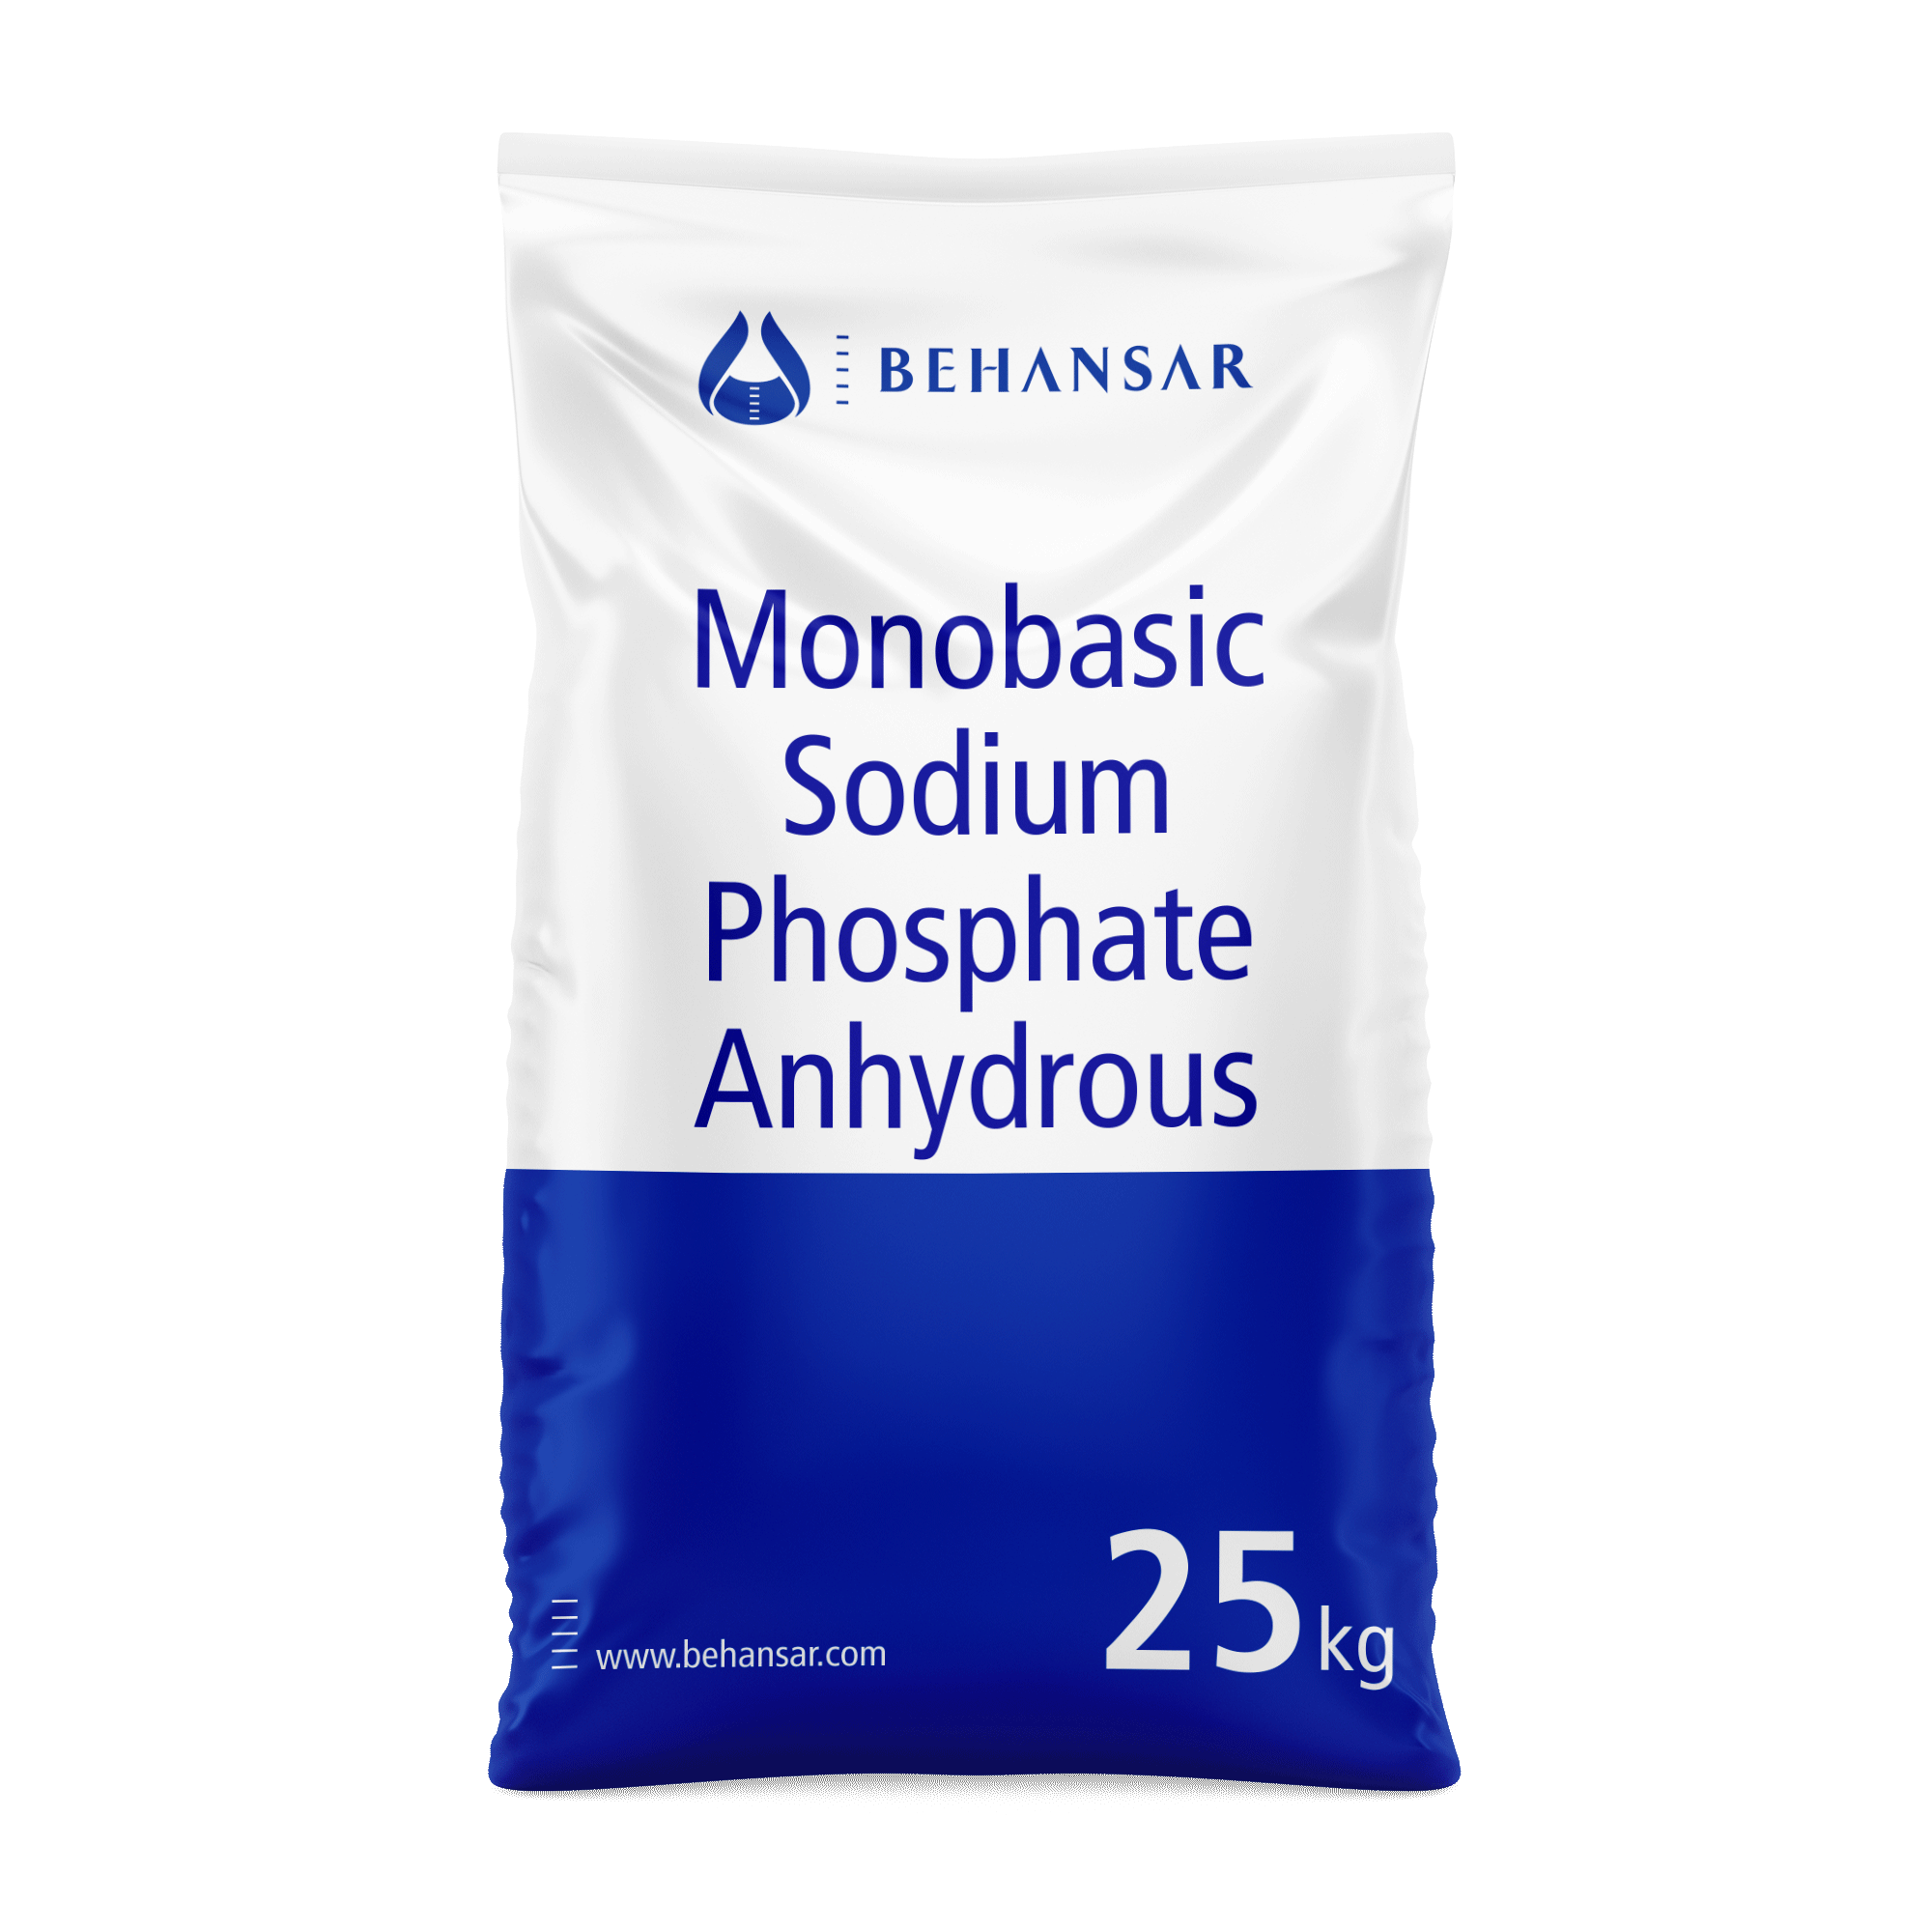 Monobasic Sodium Phosphate Anhydrous is one of the products of Behansar Co